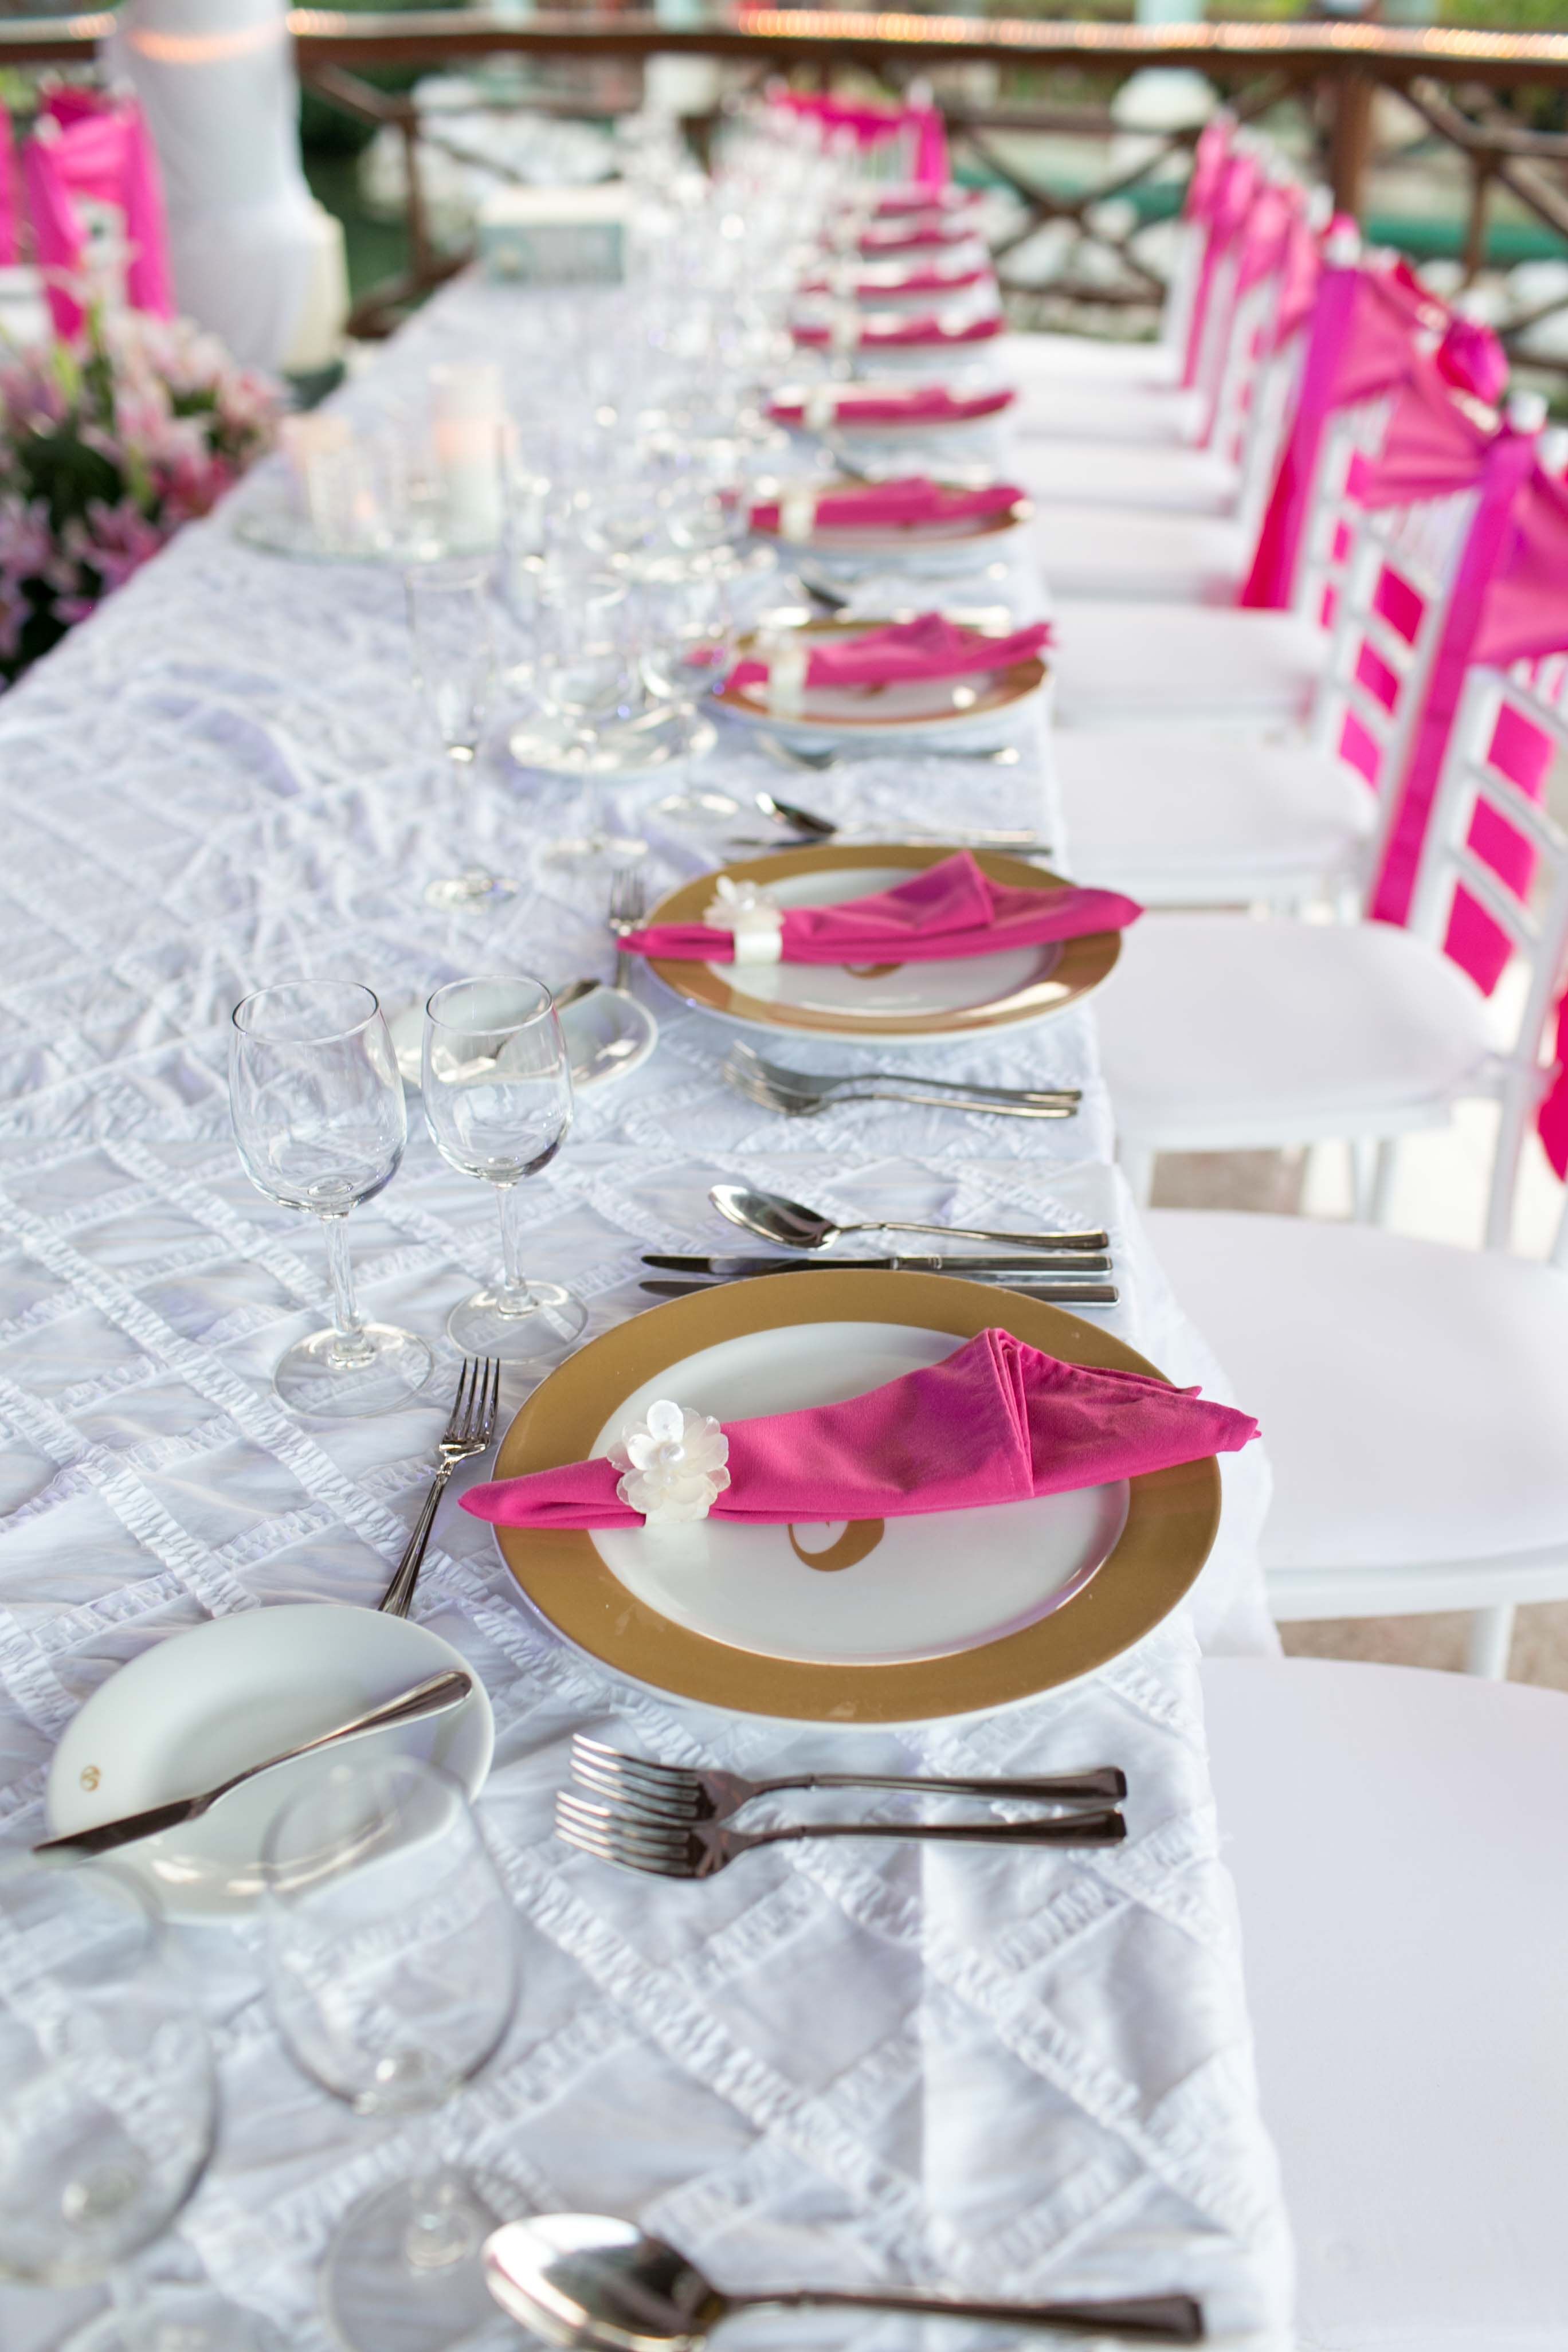 Floral Napkin Rings and Gold China